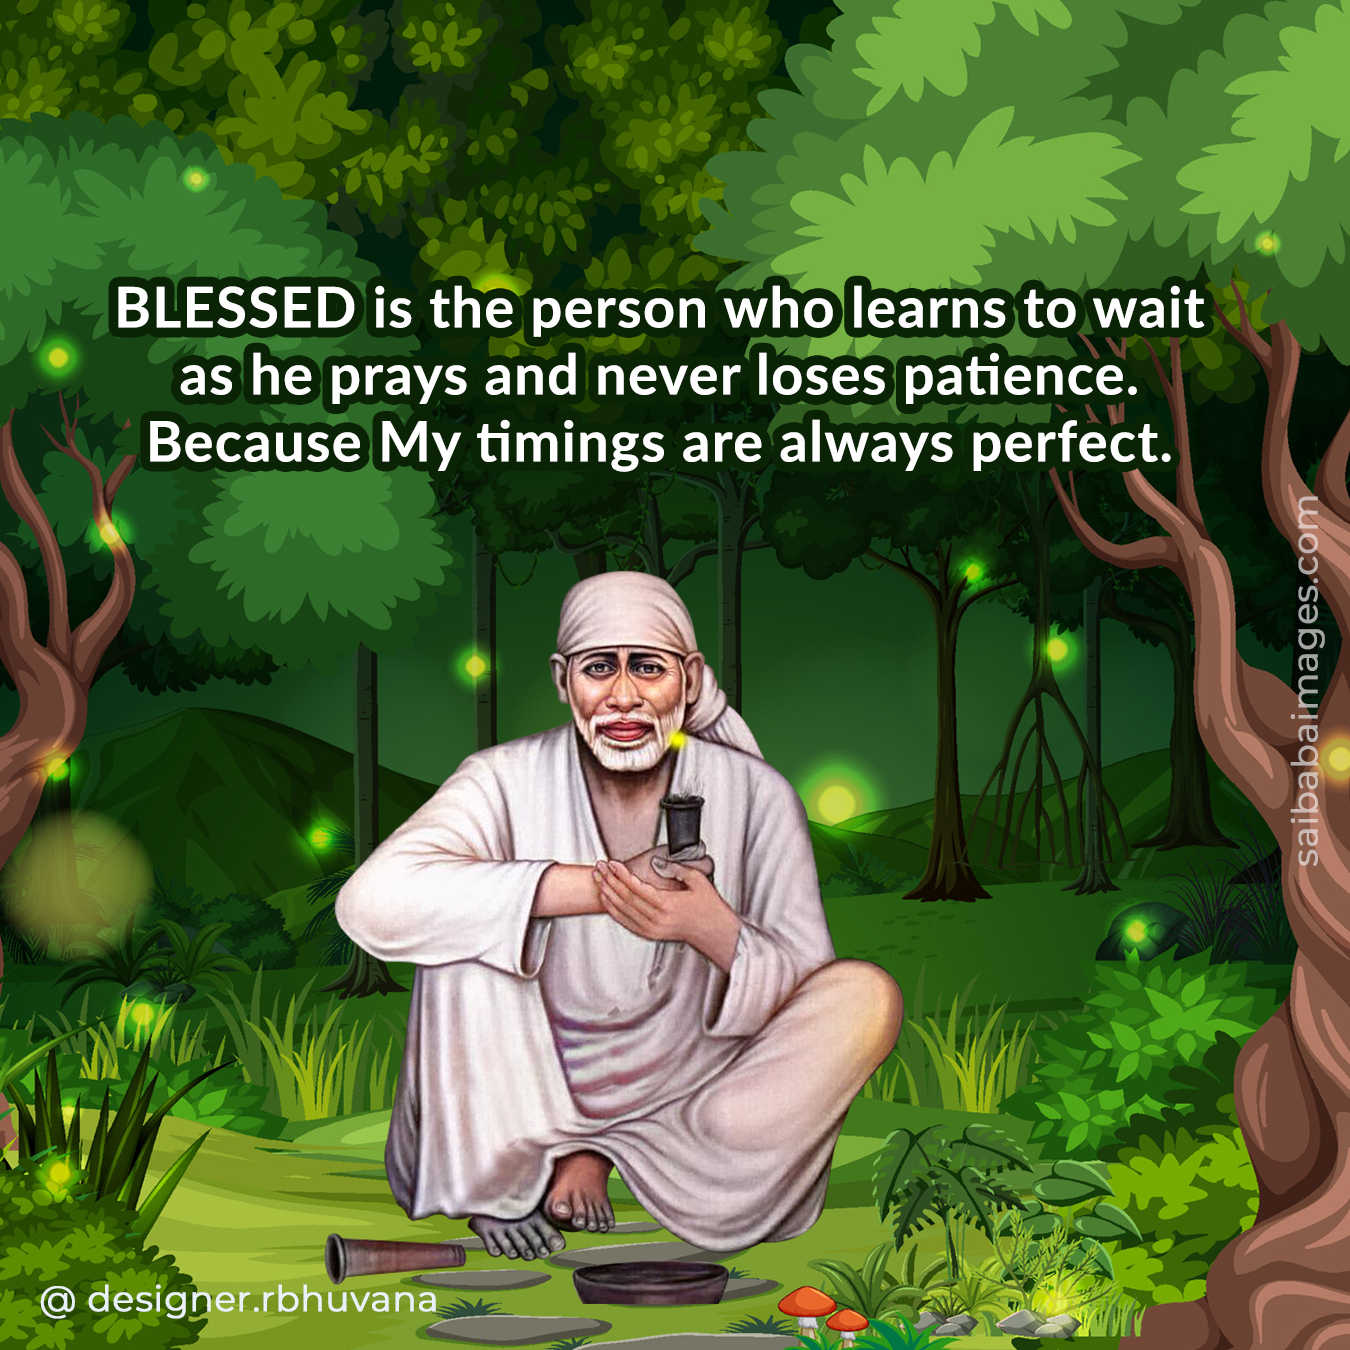 50+ Best Sai Baba Painting Ideas Quotes In 2022 - Pinterest